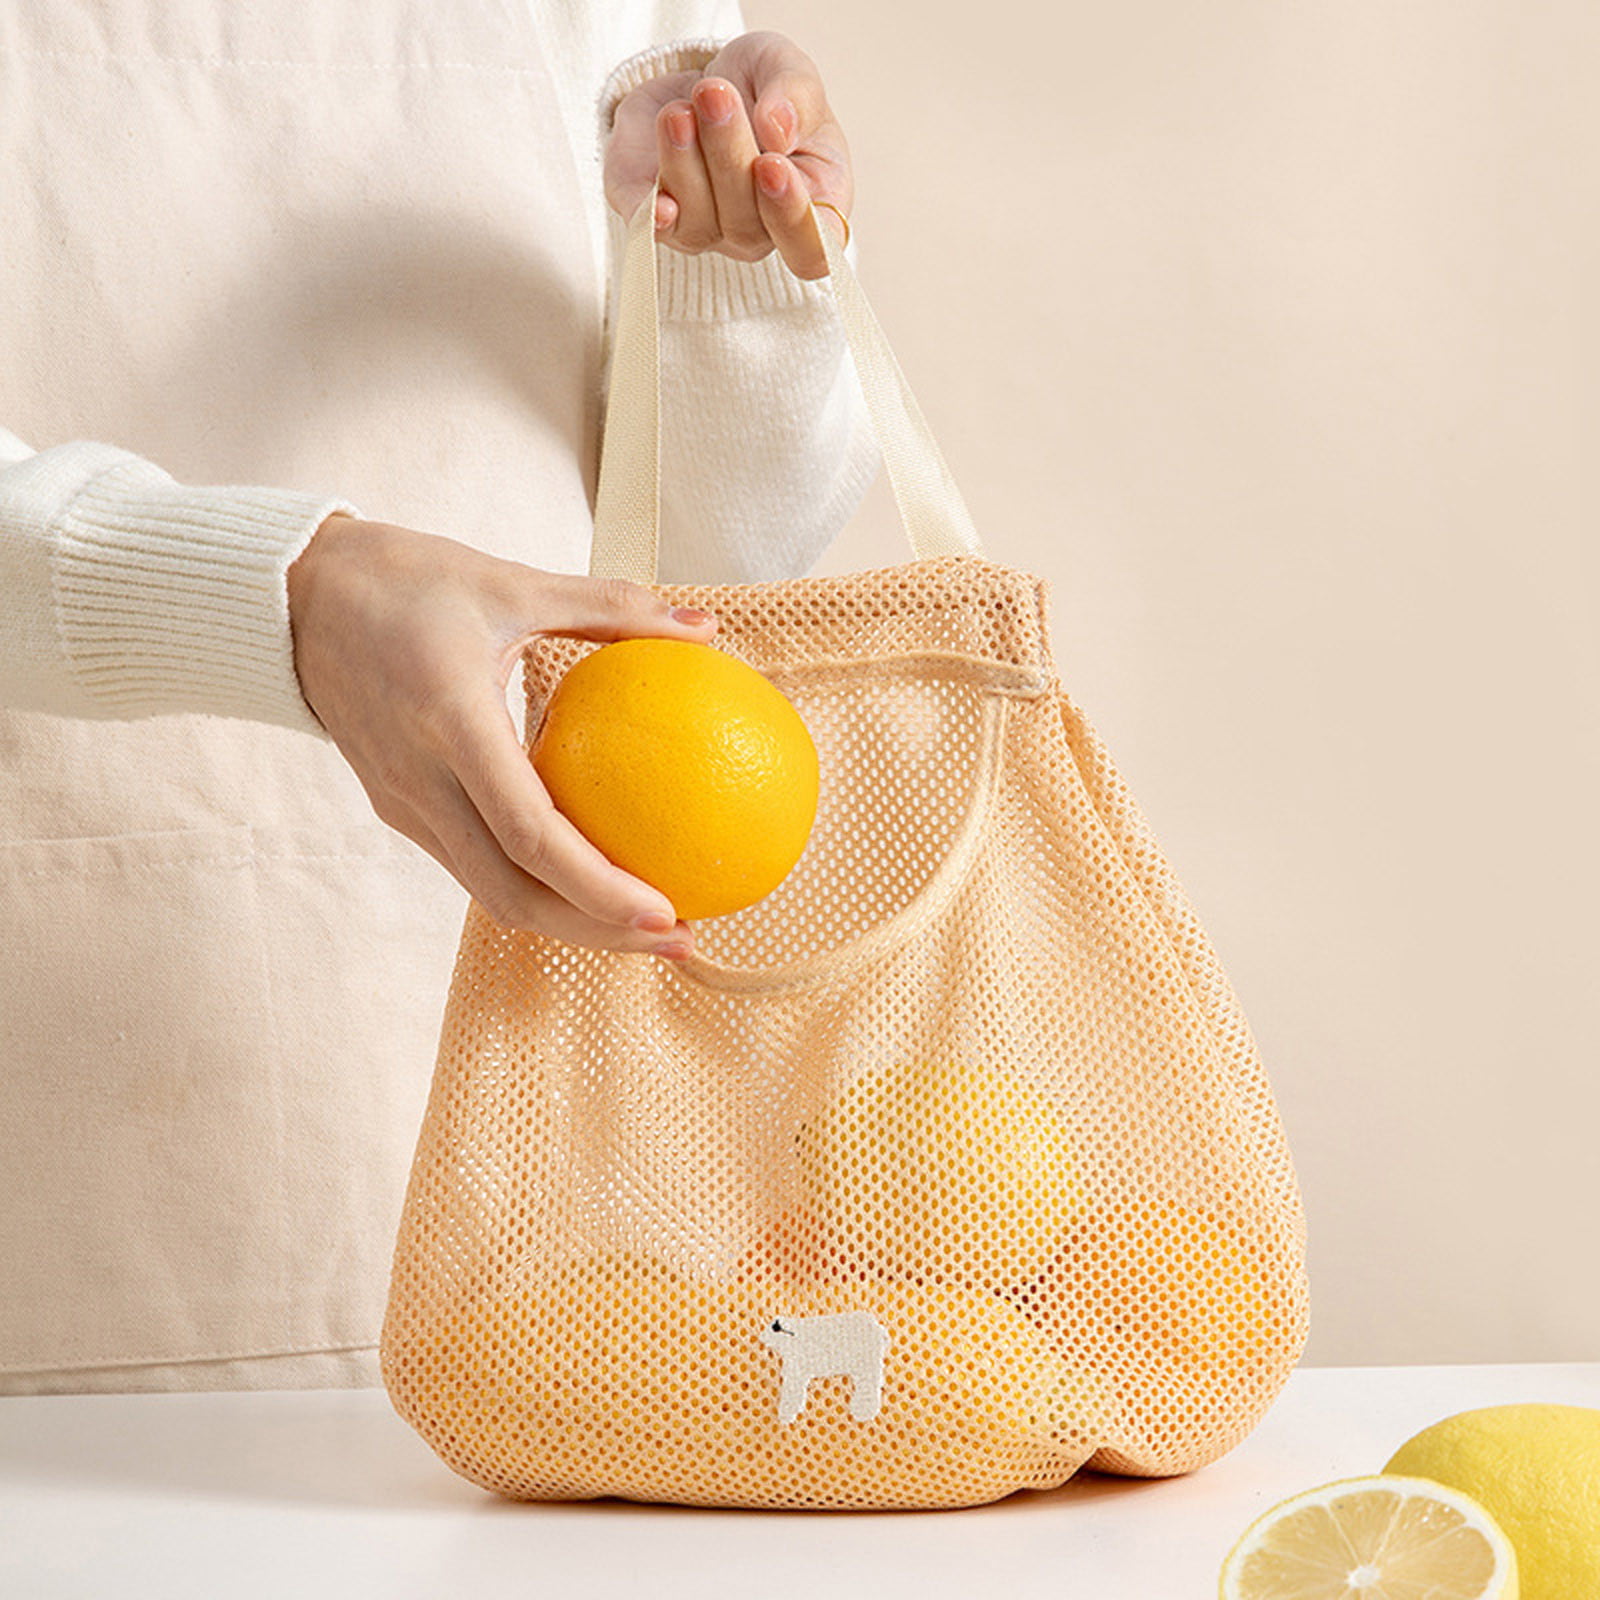 Details about   Foldable Handy Shopping Bag Reusable Tote Pouch Recycle Storage Portable Handbag 